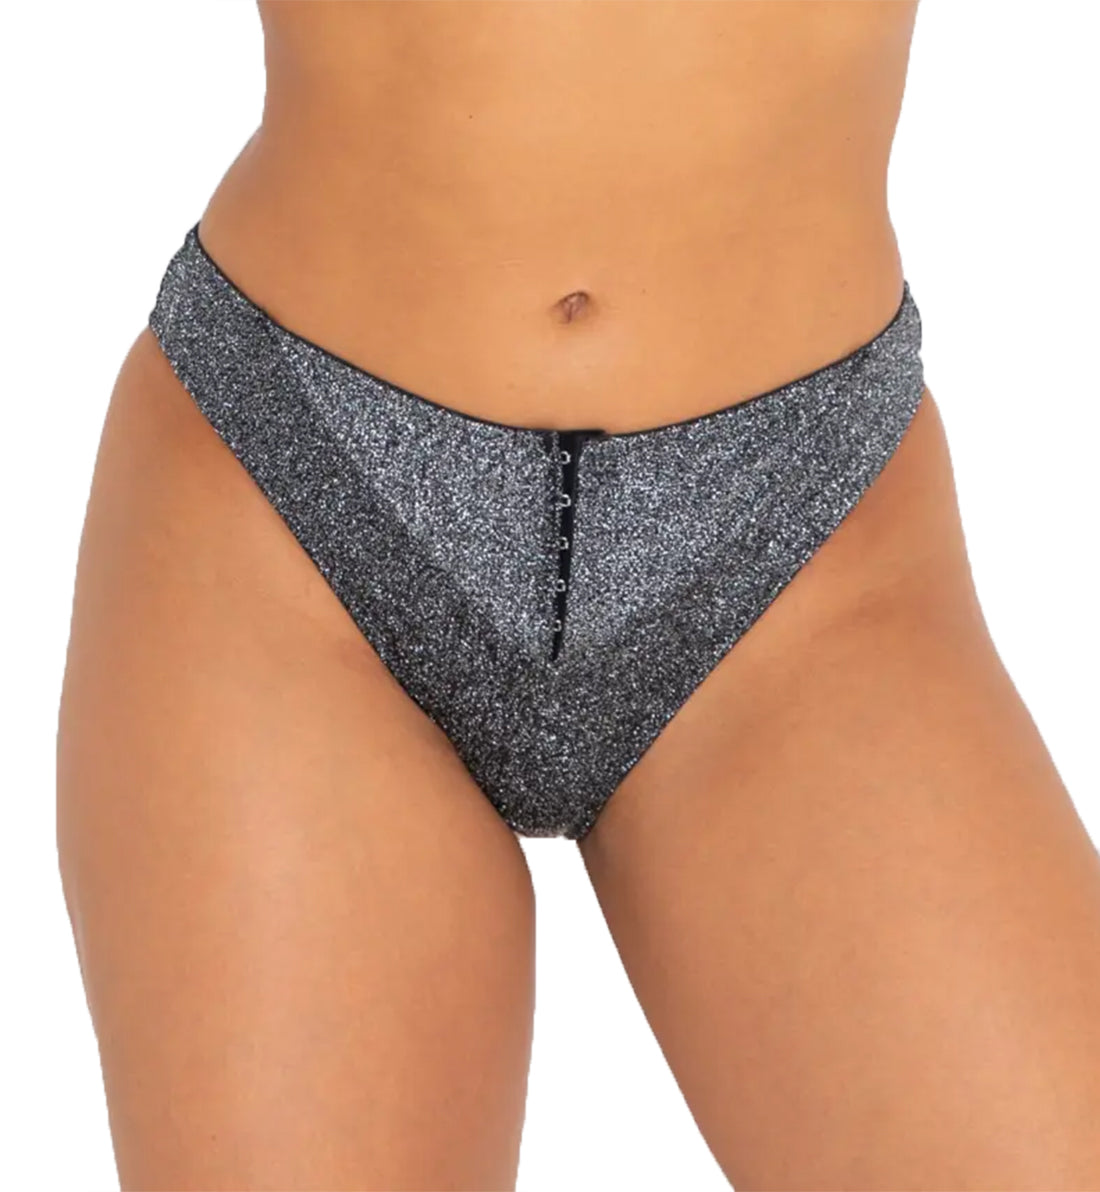 Pour Moi All That Glitters V-Brief (23503),XS,Silver - Silver,XS